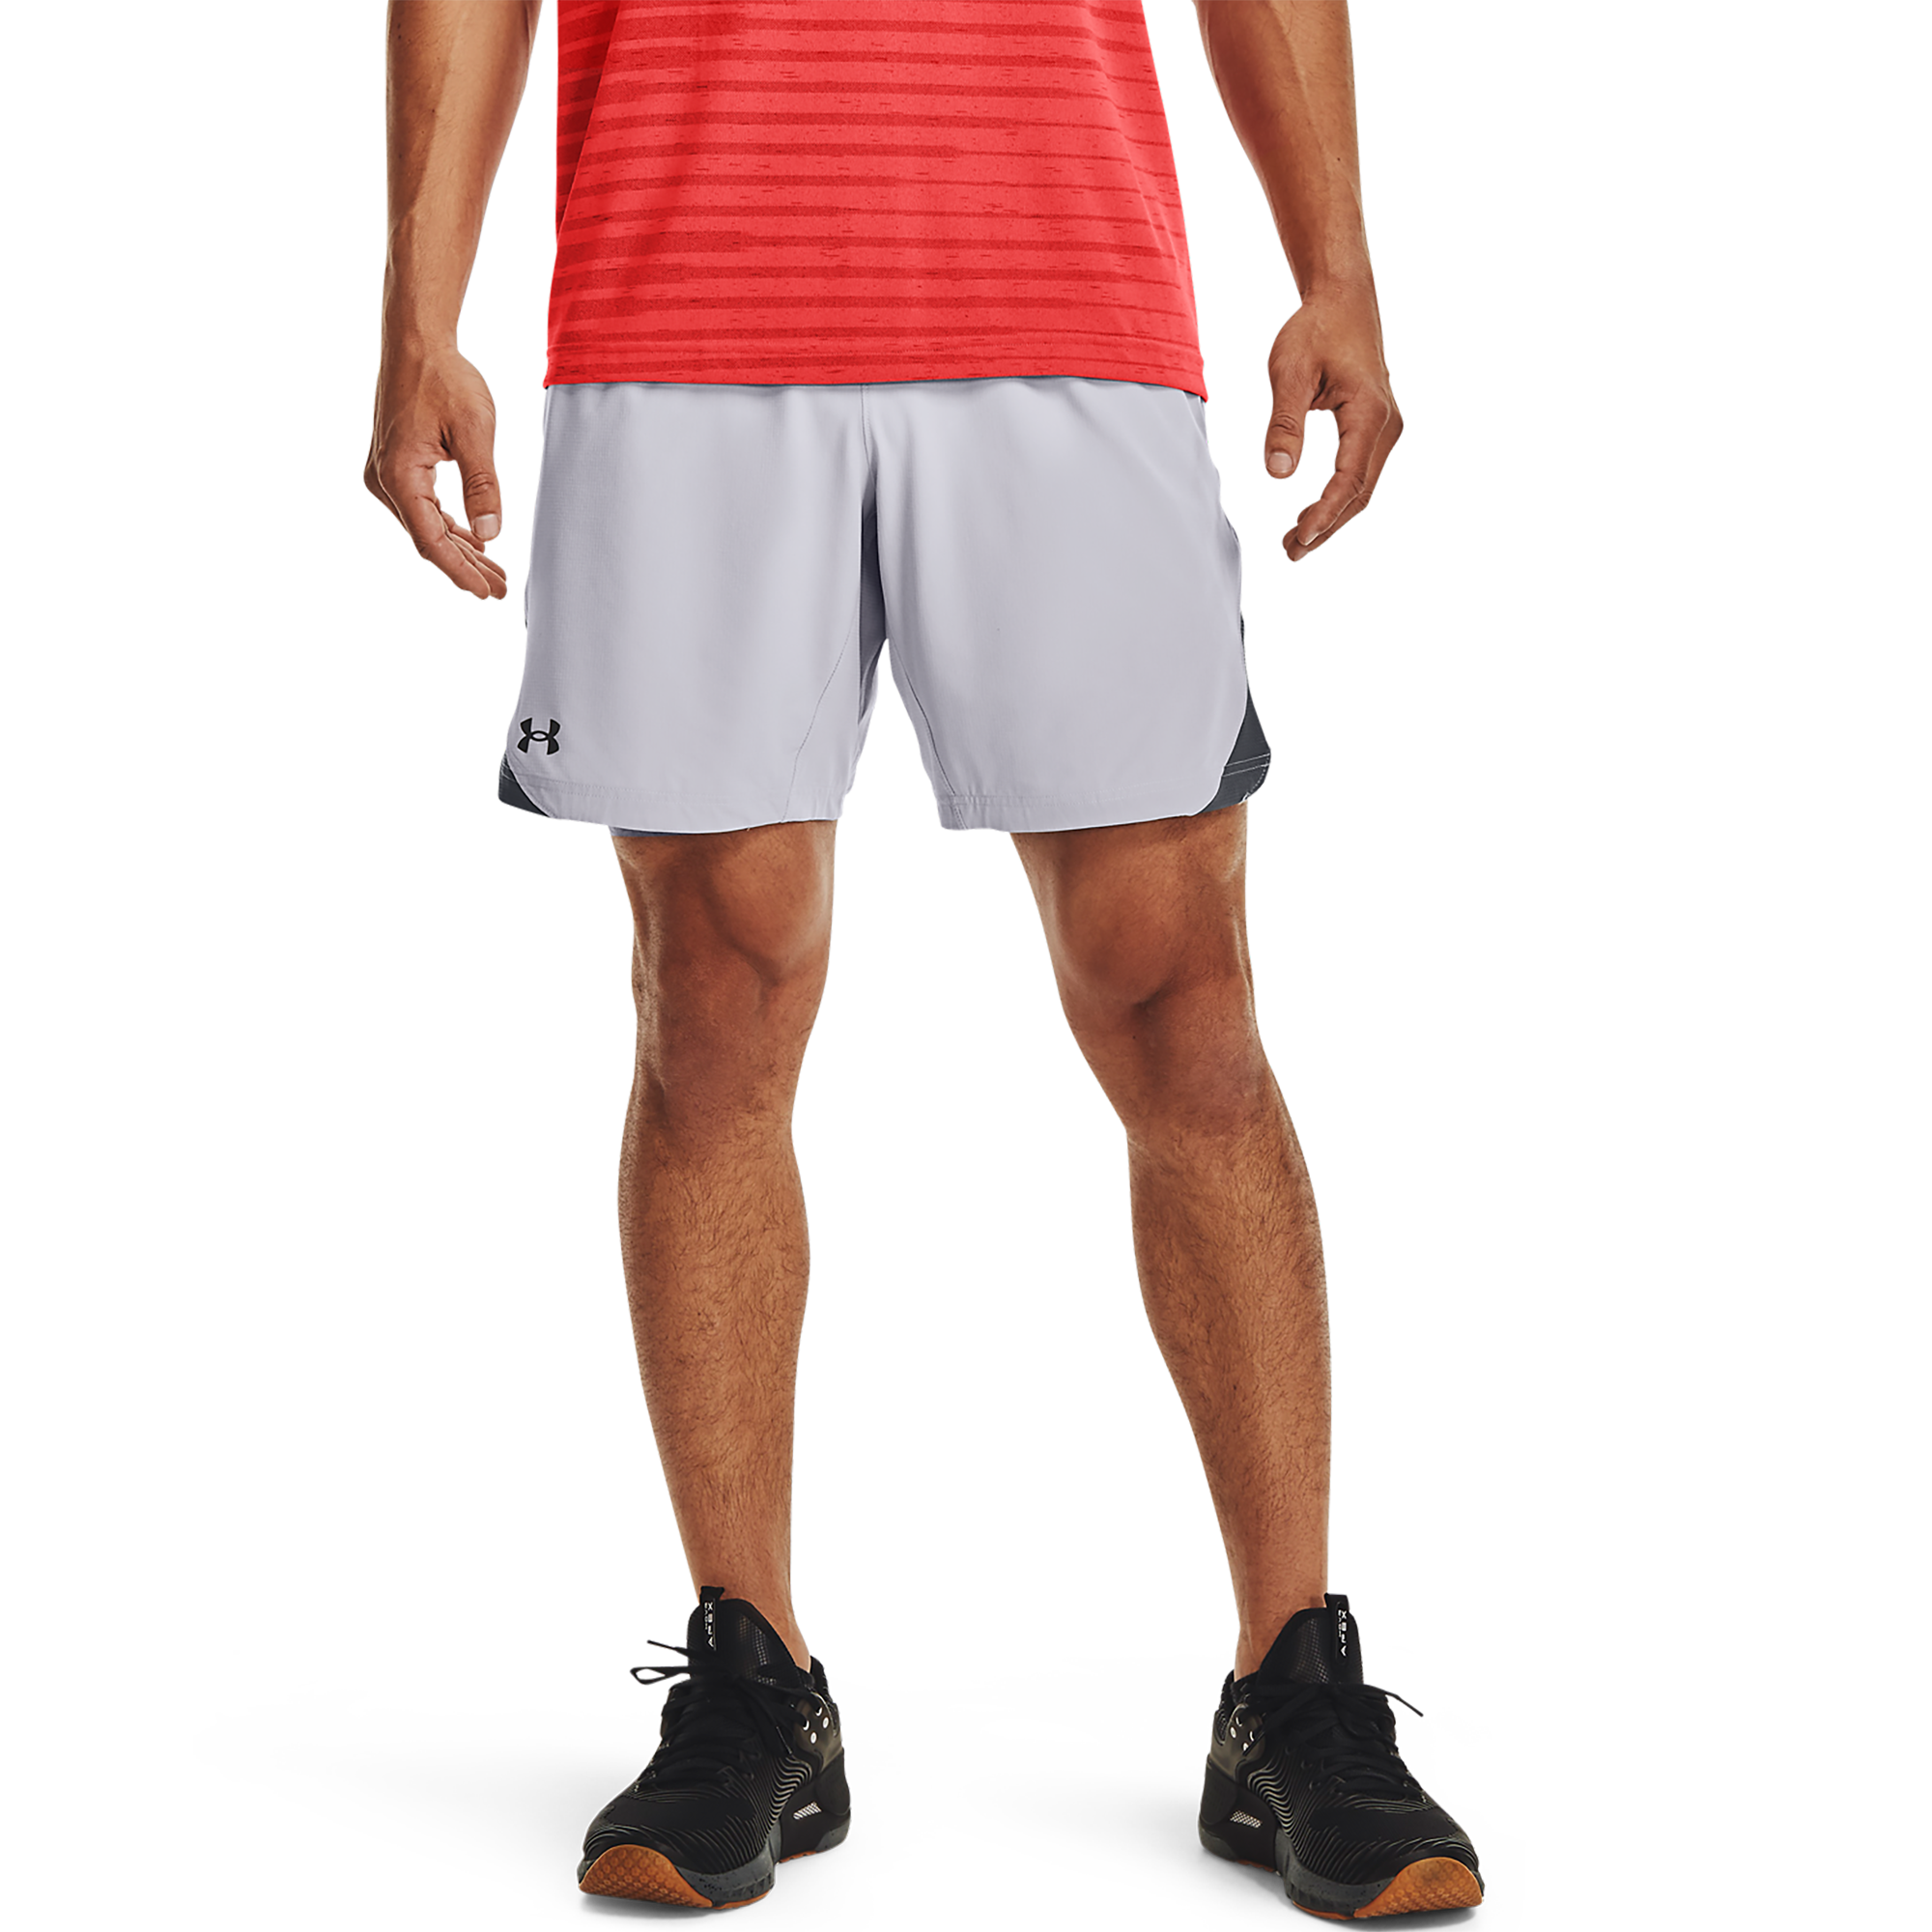 Under Armour Woven Graphic Shorts 2023, Buy Under Armour Online